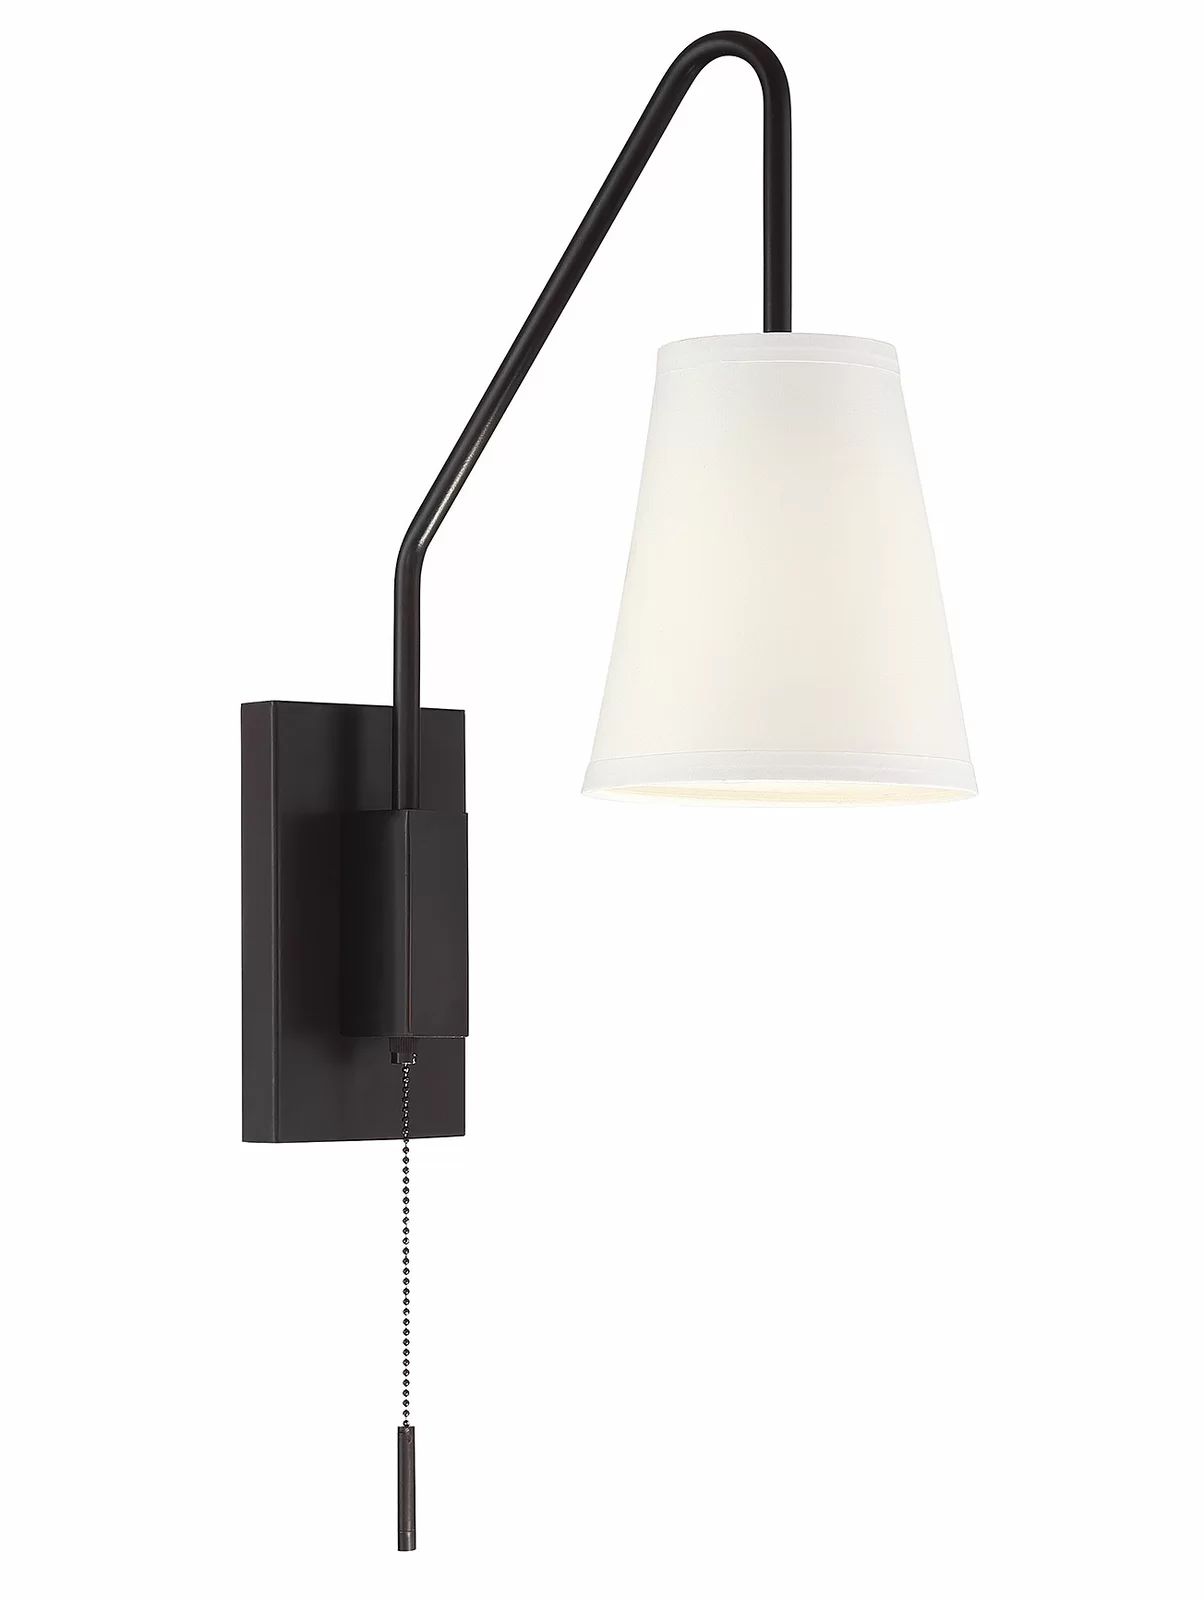 Bailee 1 - Light Dimmable Armed Sconce | Wayfair Professional